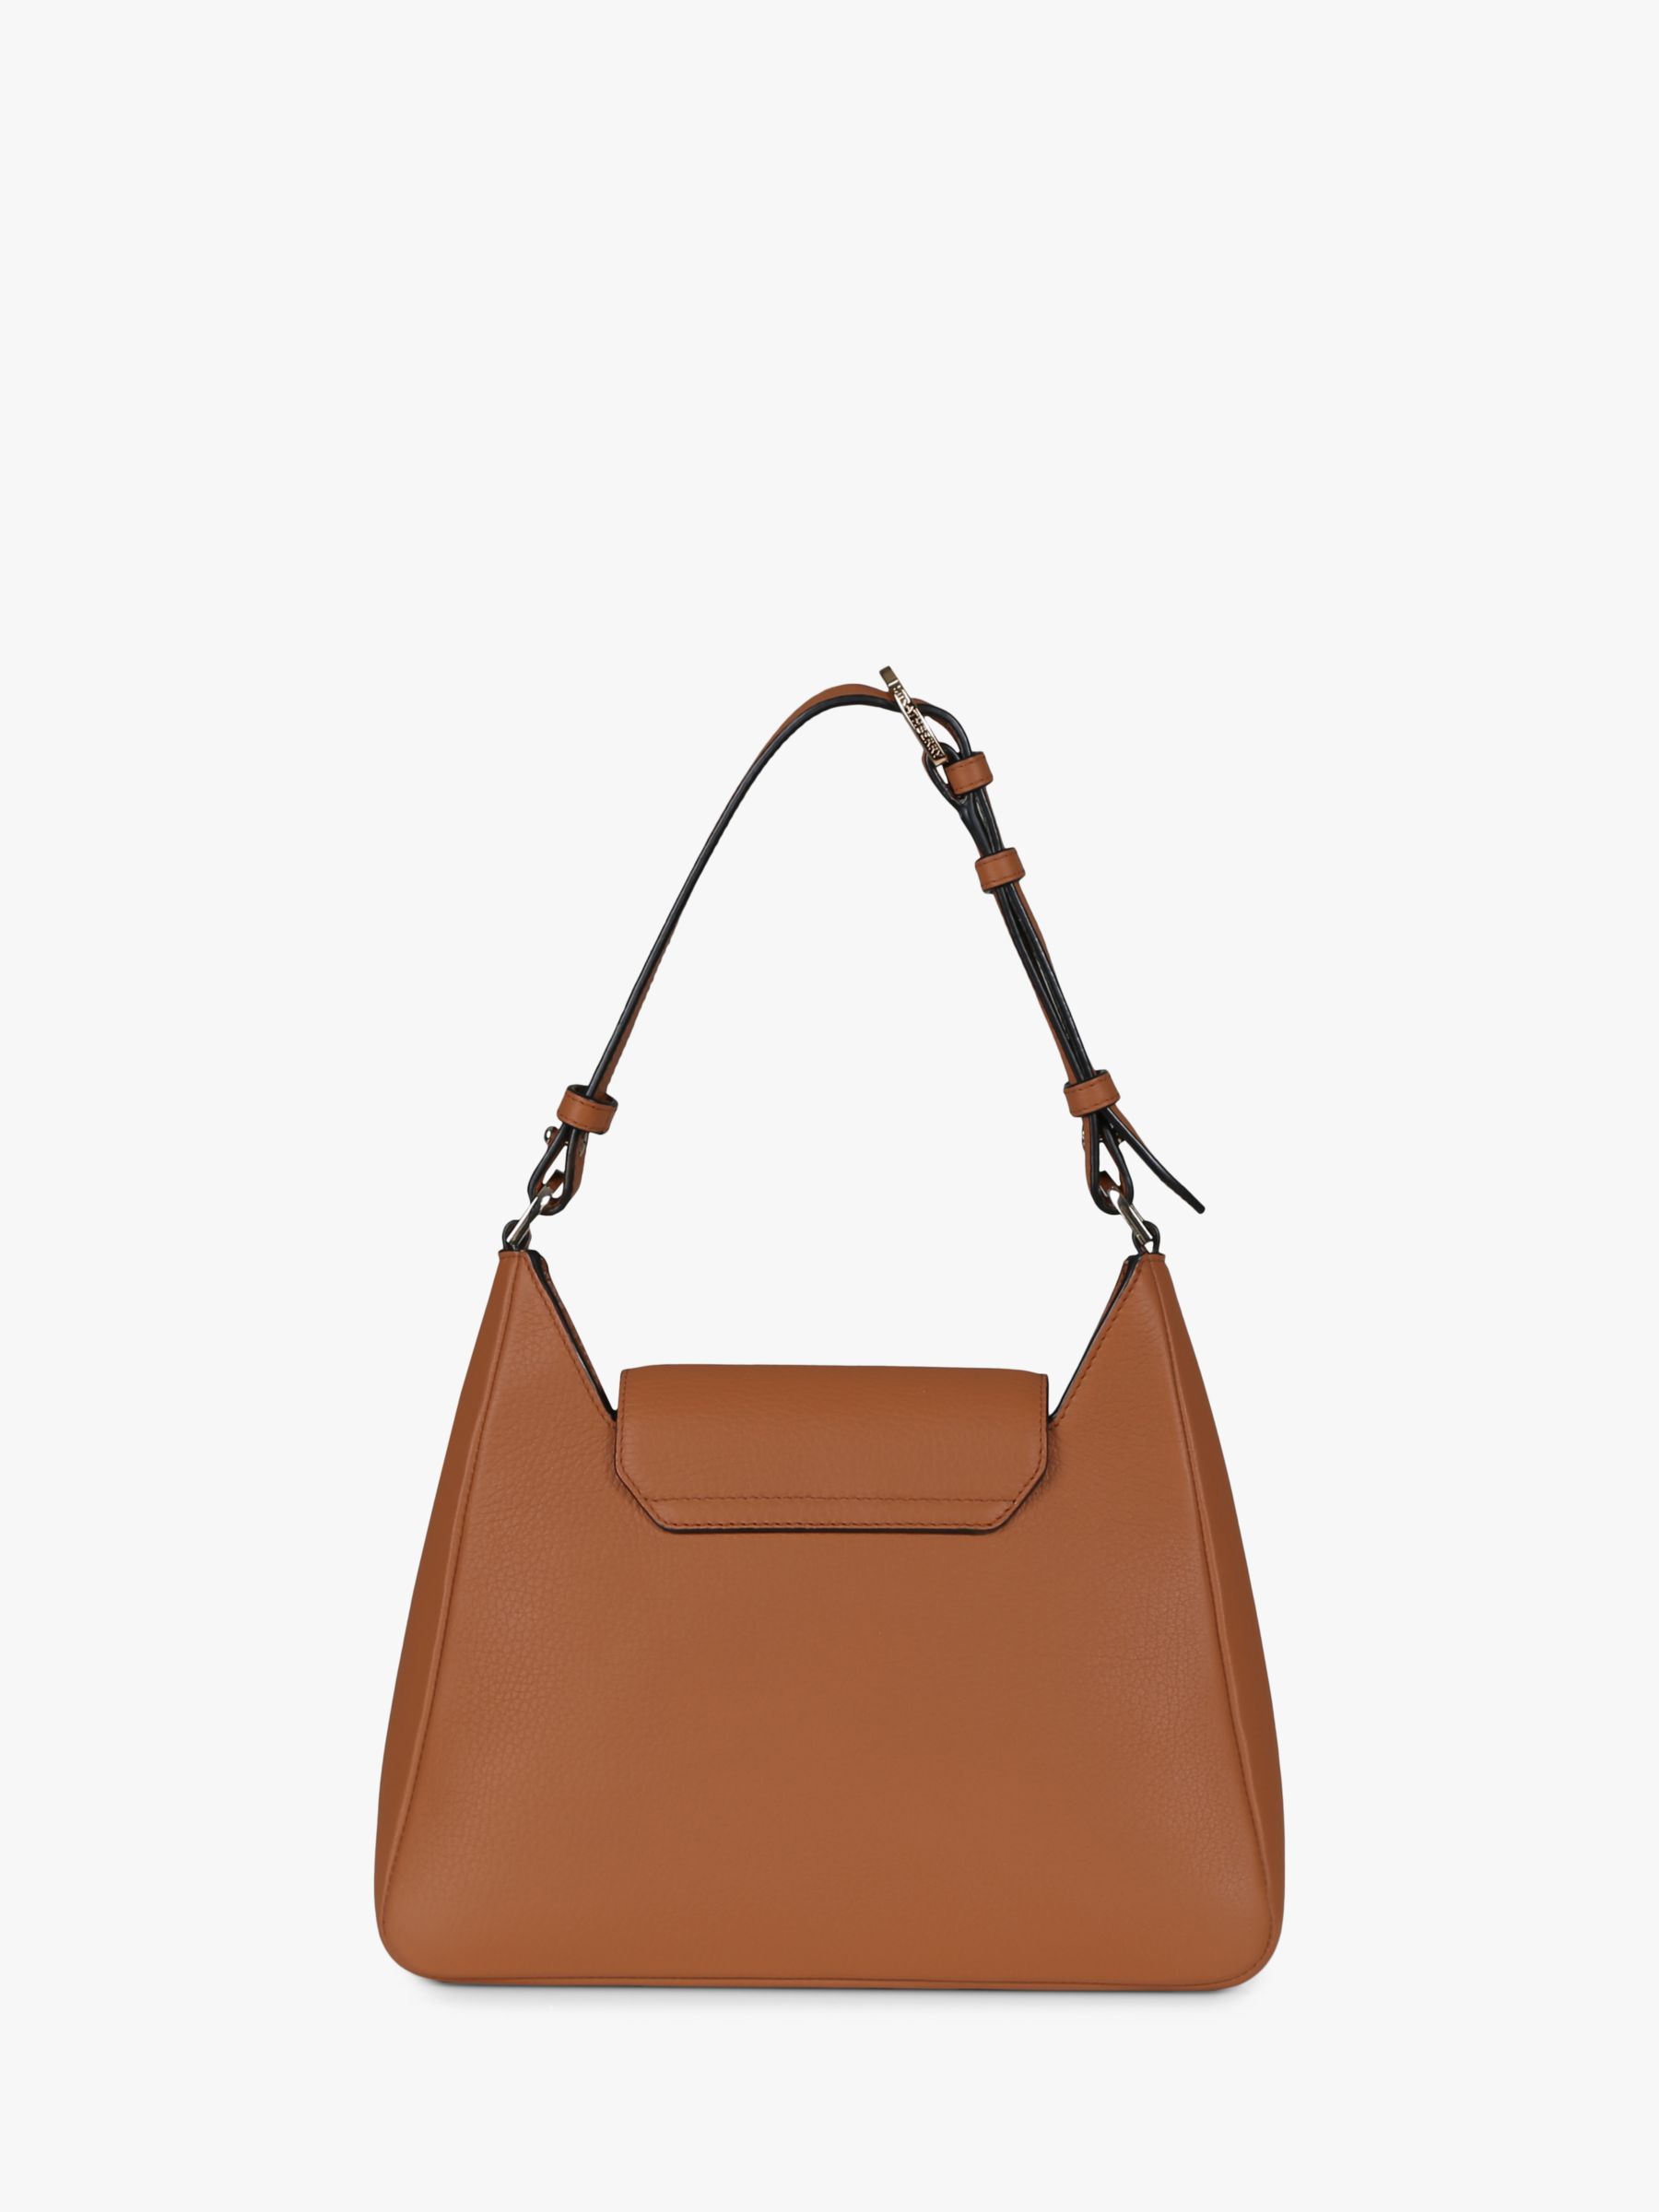 Strathberry Multrees Leather Hobo Bag, Tan